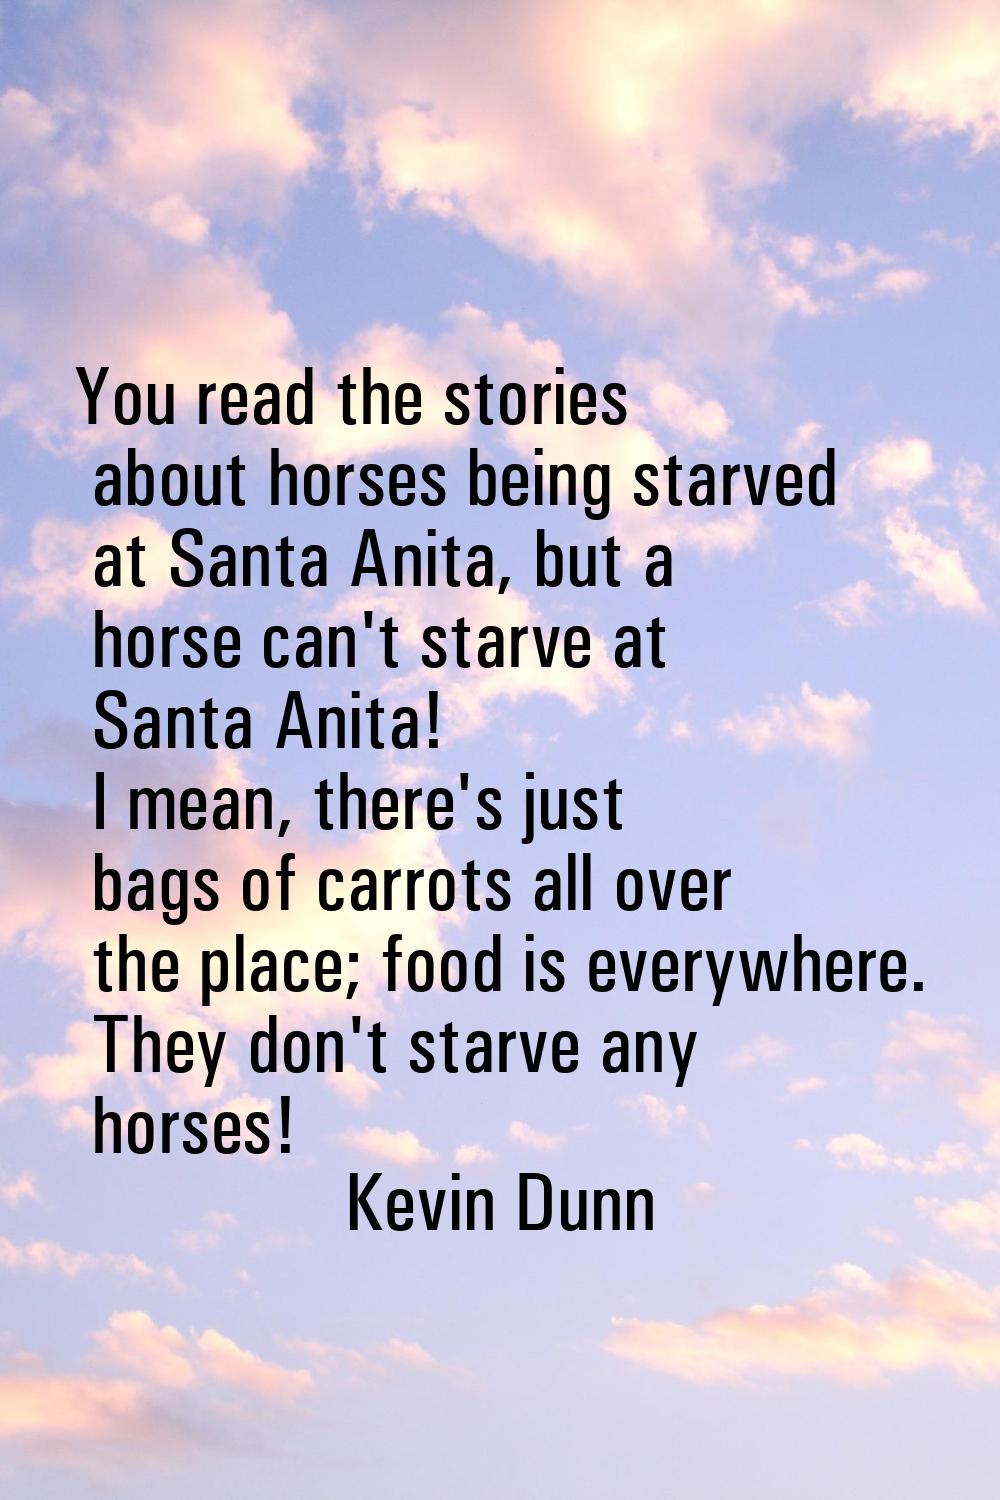 You read the stories about horses being starved at Santa Anita, but a horse can't starve at Santa A